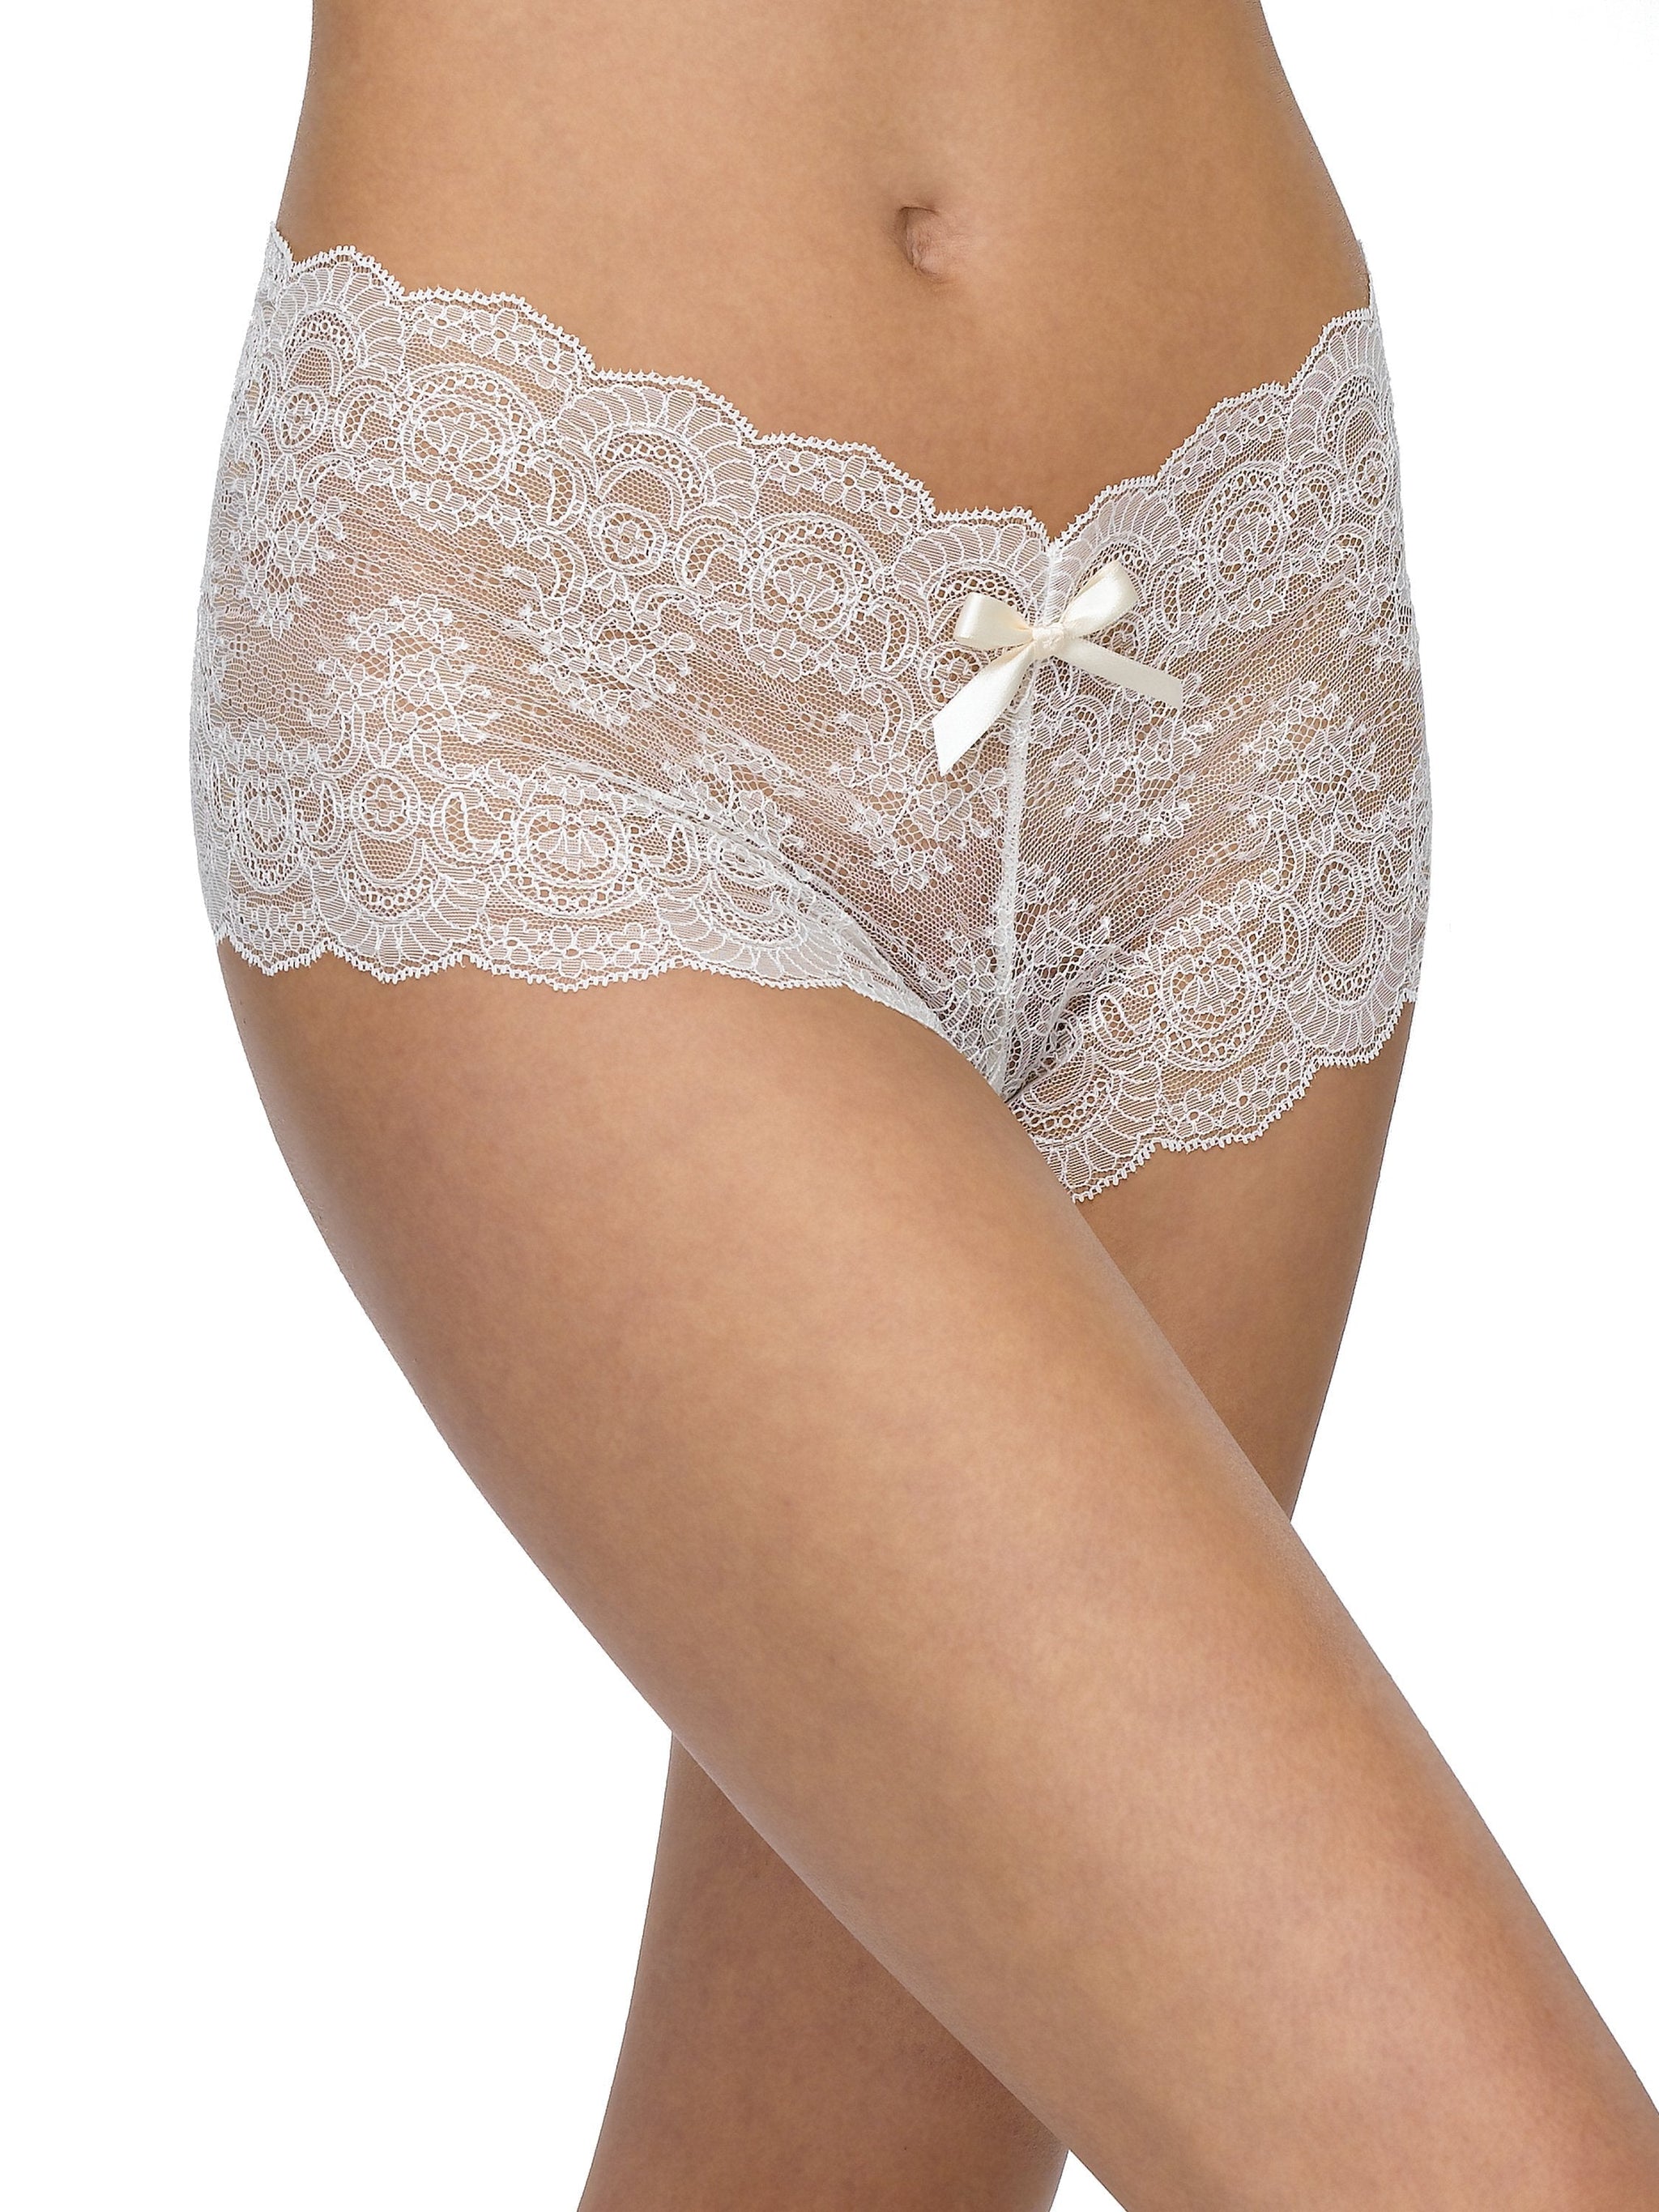 Panache Assorted Bridal Thong Panty Confetti Serenity Evie